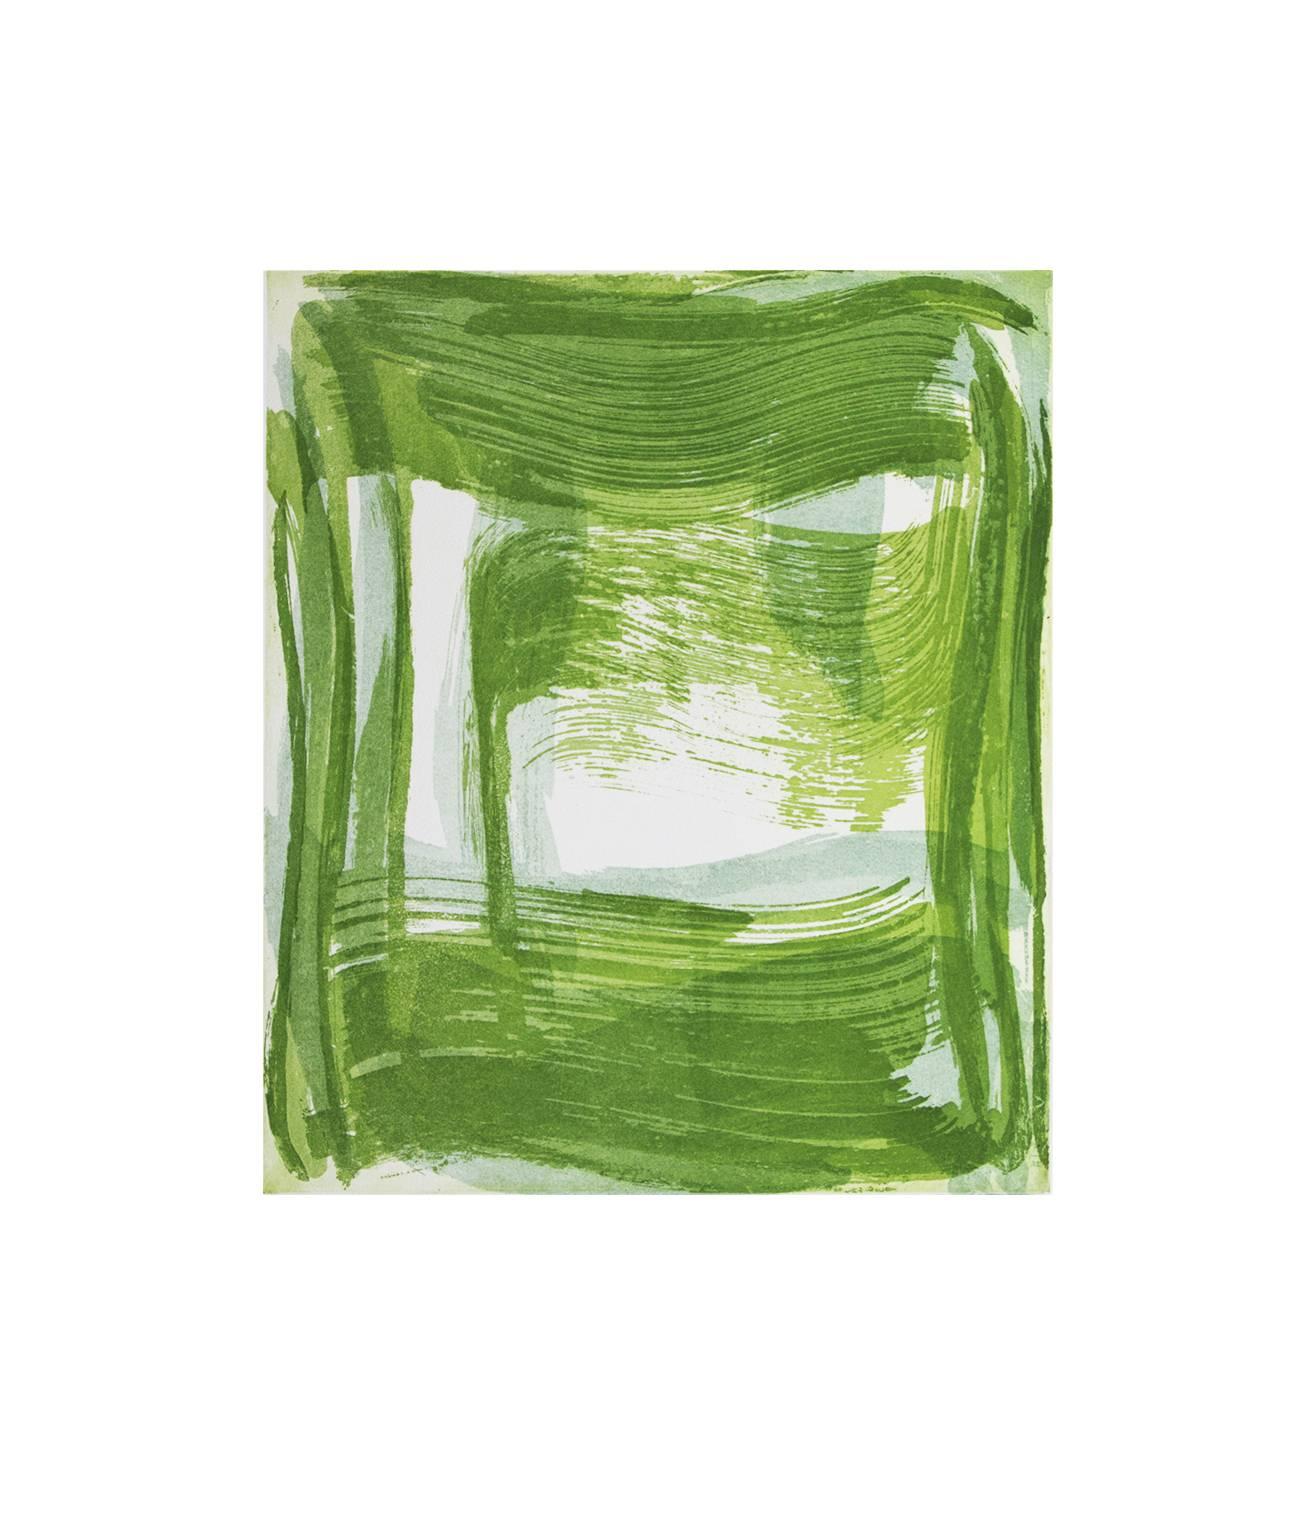 Anne Russinof Abstract Print - "Broad Strokes Four", gestural abstract monoprint, pale gray, spring green.